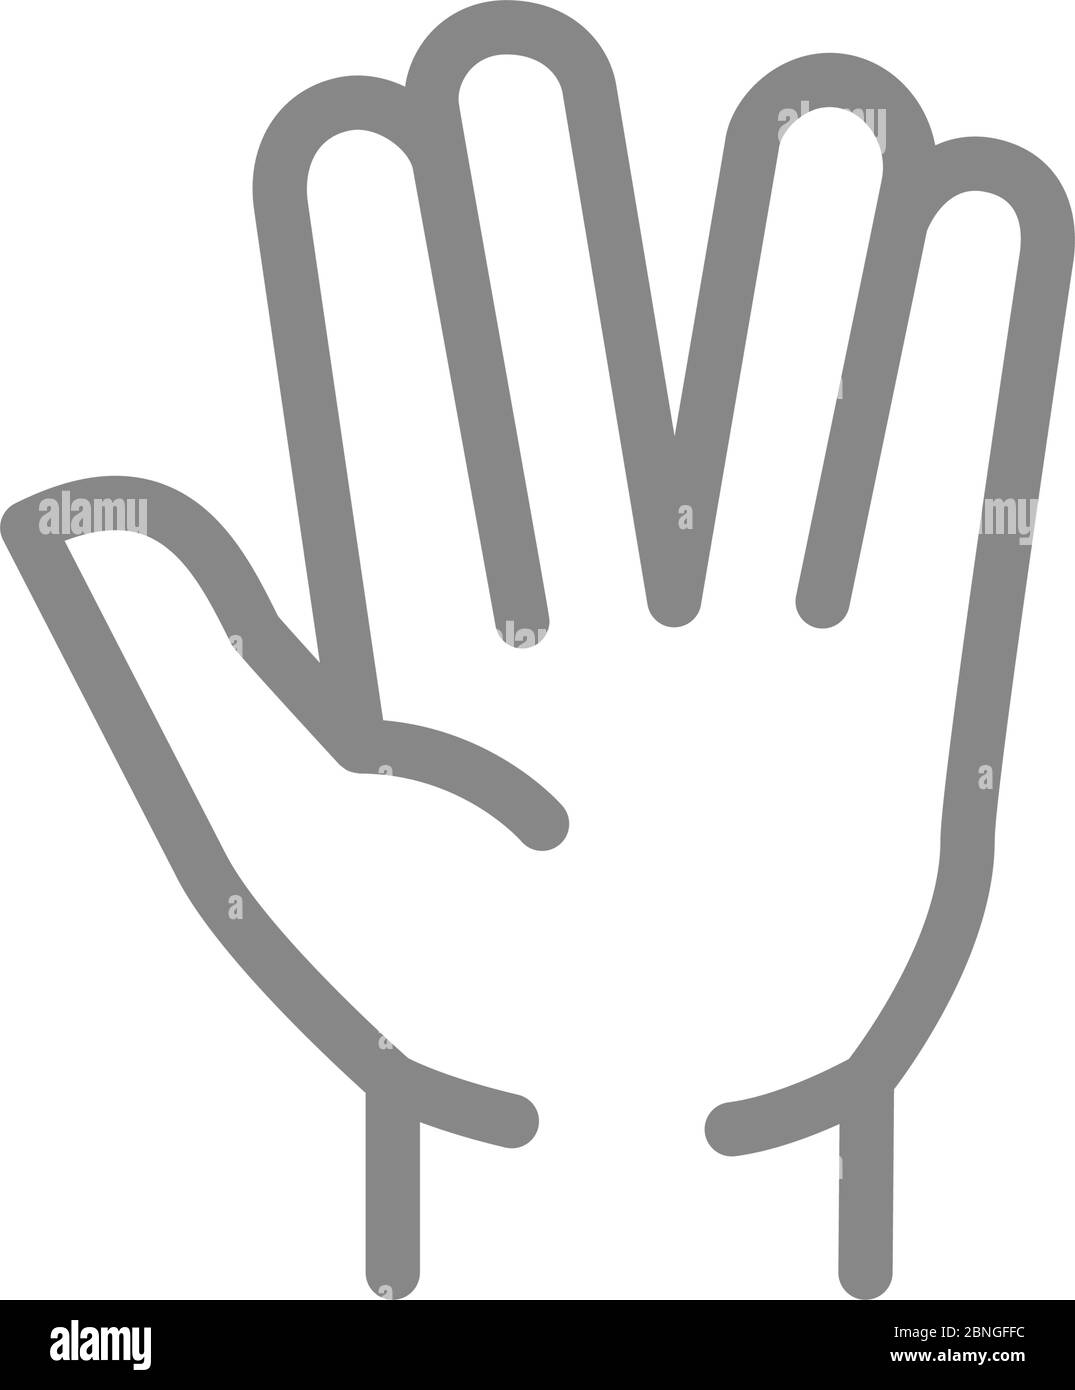 Vulcan salute line icon. What's up gestures symbol Stock Vector